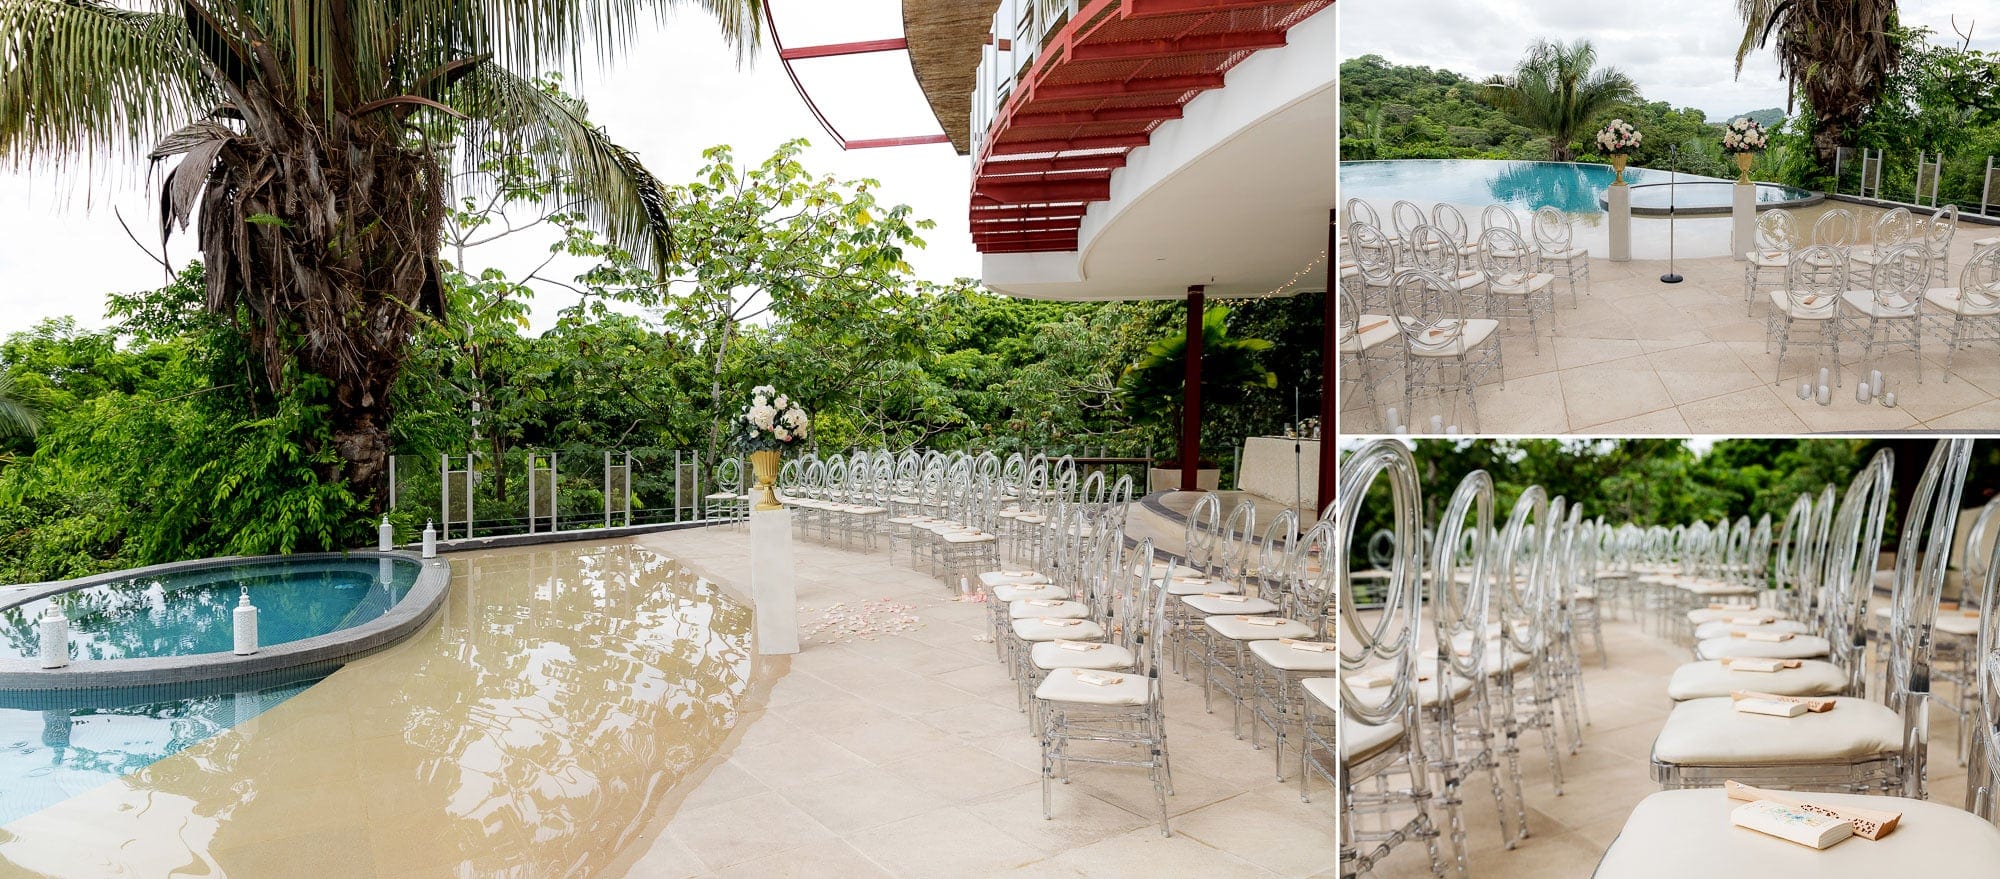 Wedding venue ideas: clear seating in front a pool with a breathtaking view